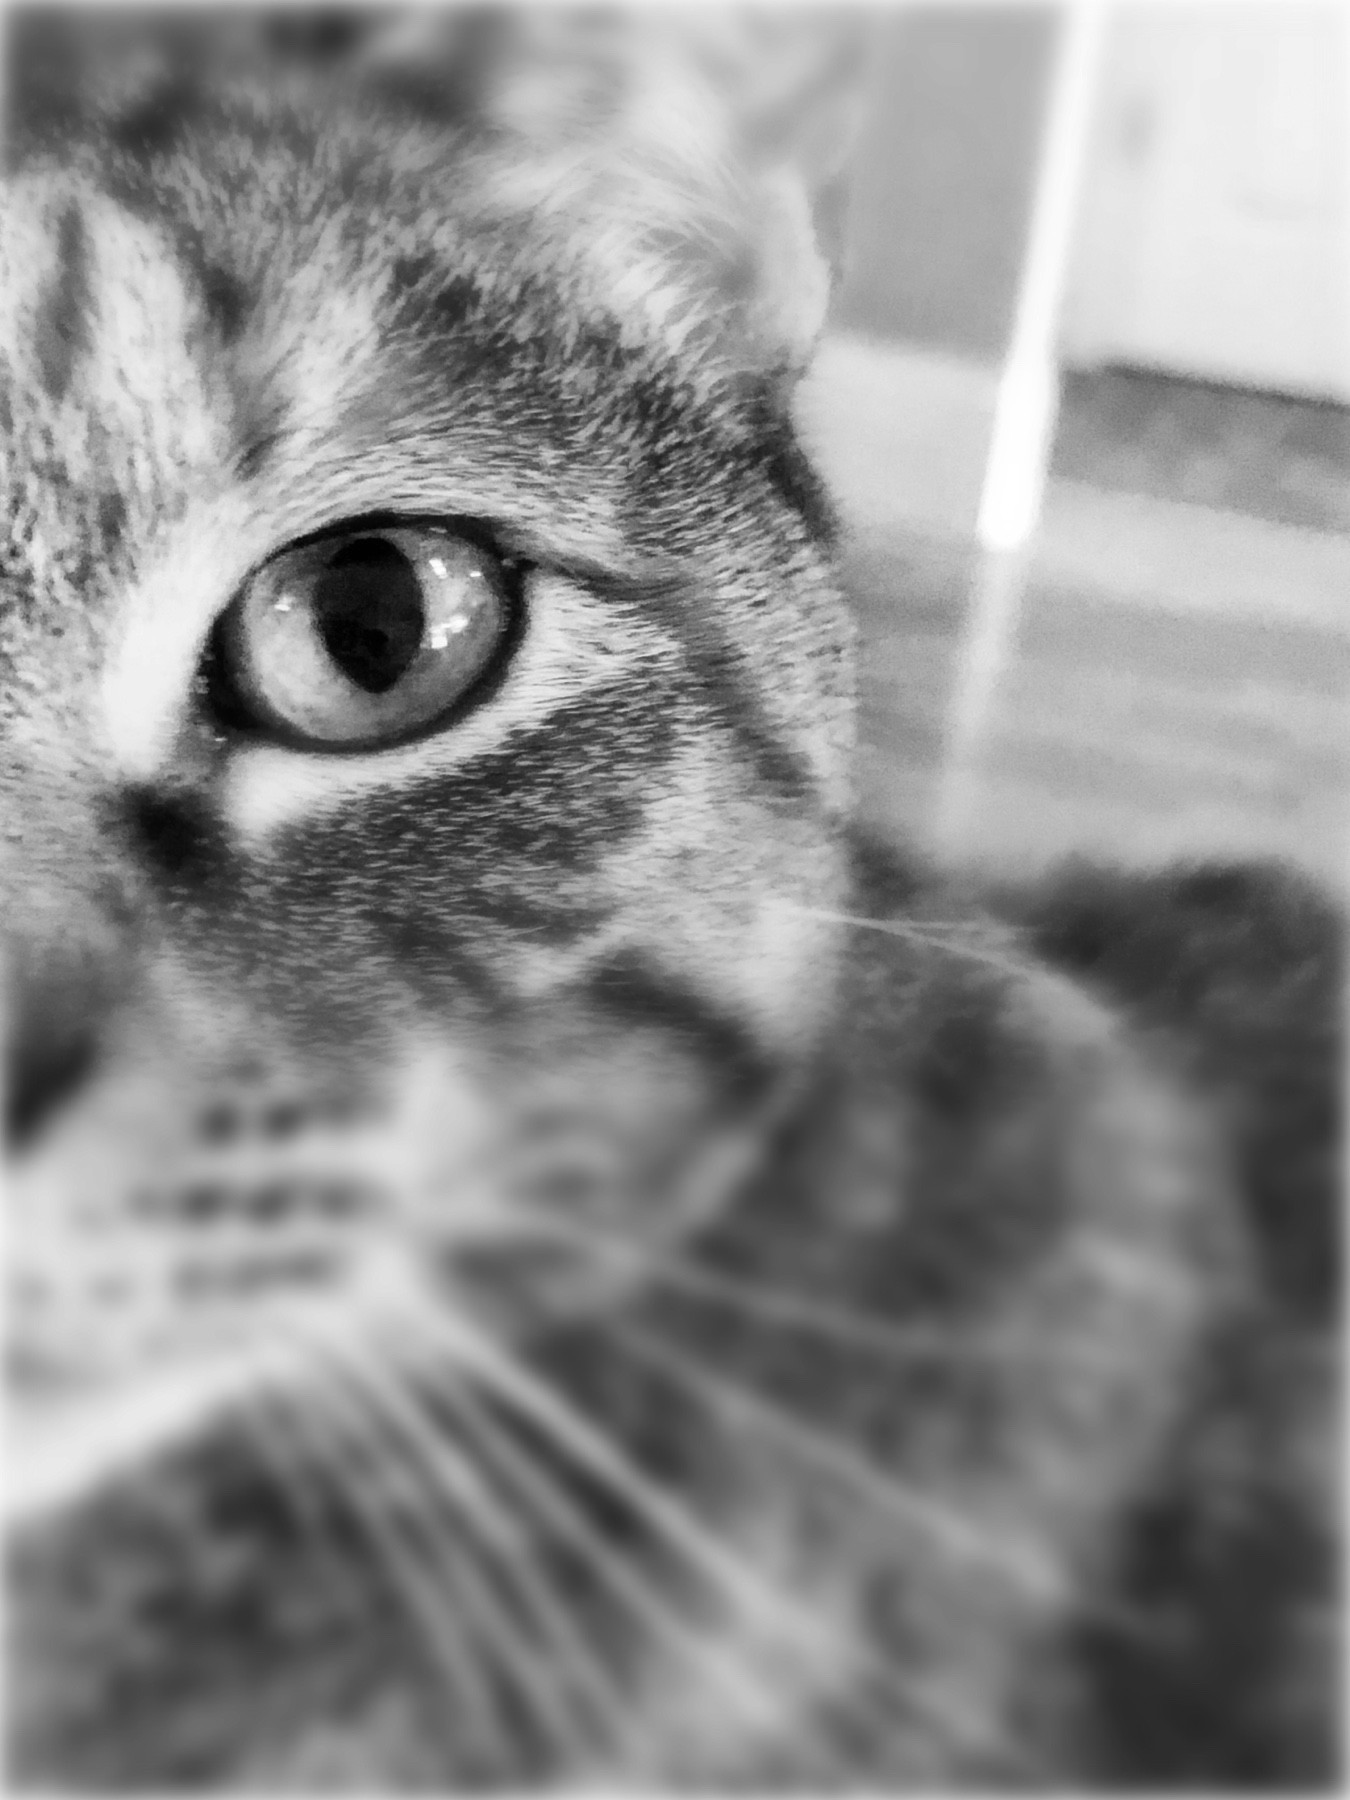 An up close shot of a cat's left eye as it faces directly into the camera.  The background is blurred.